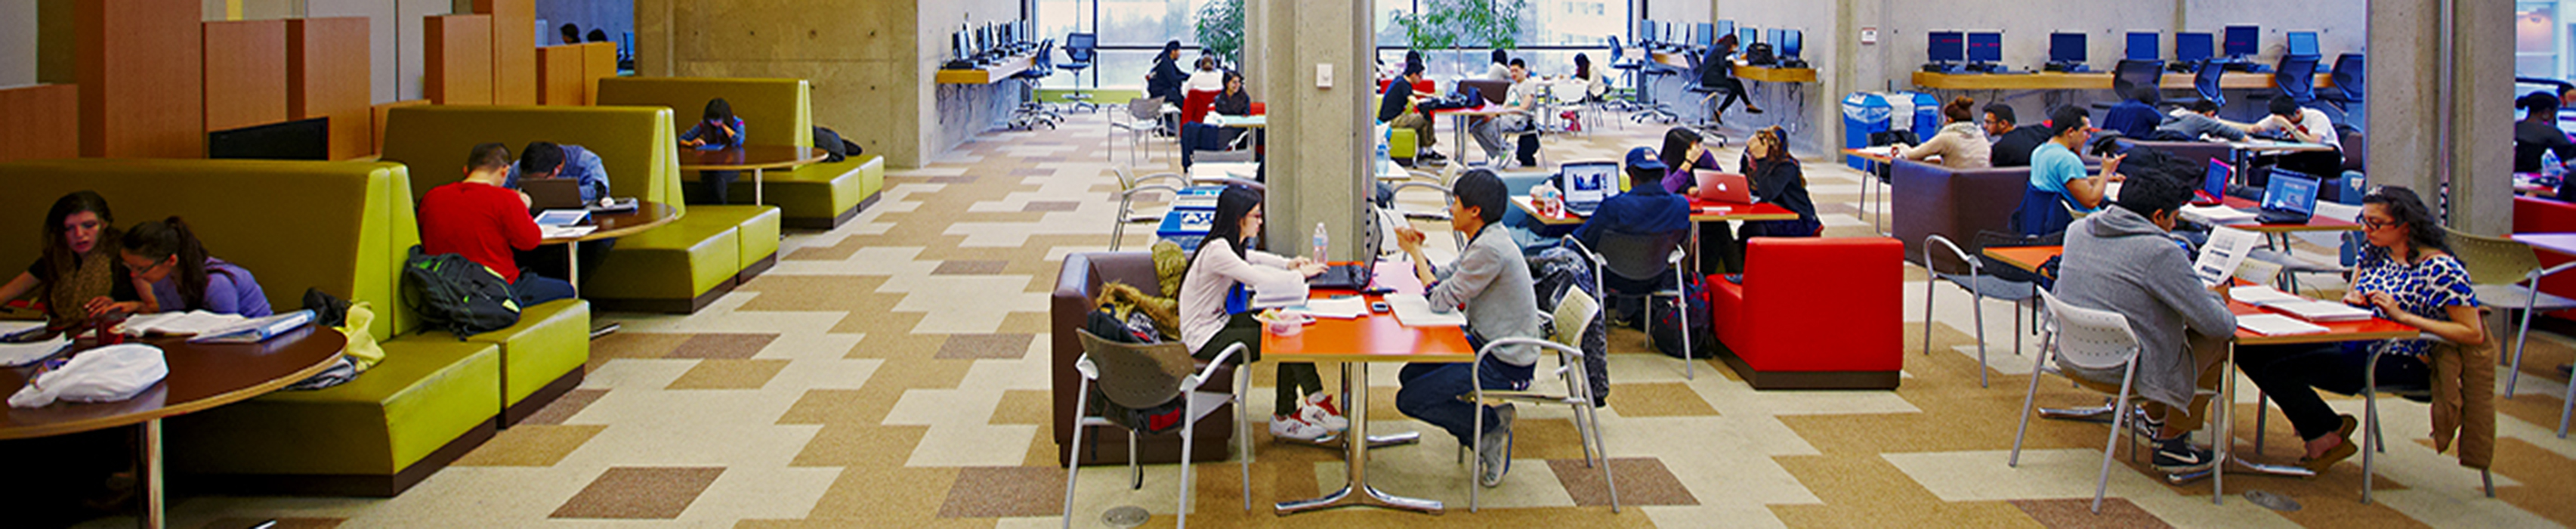 View of the Scott Library Collaboratory with students working and talking - used as a header image for the CCSD website